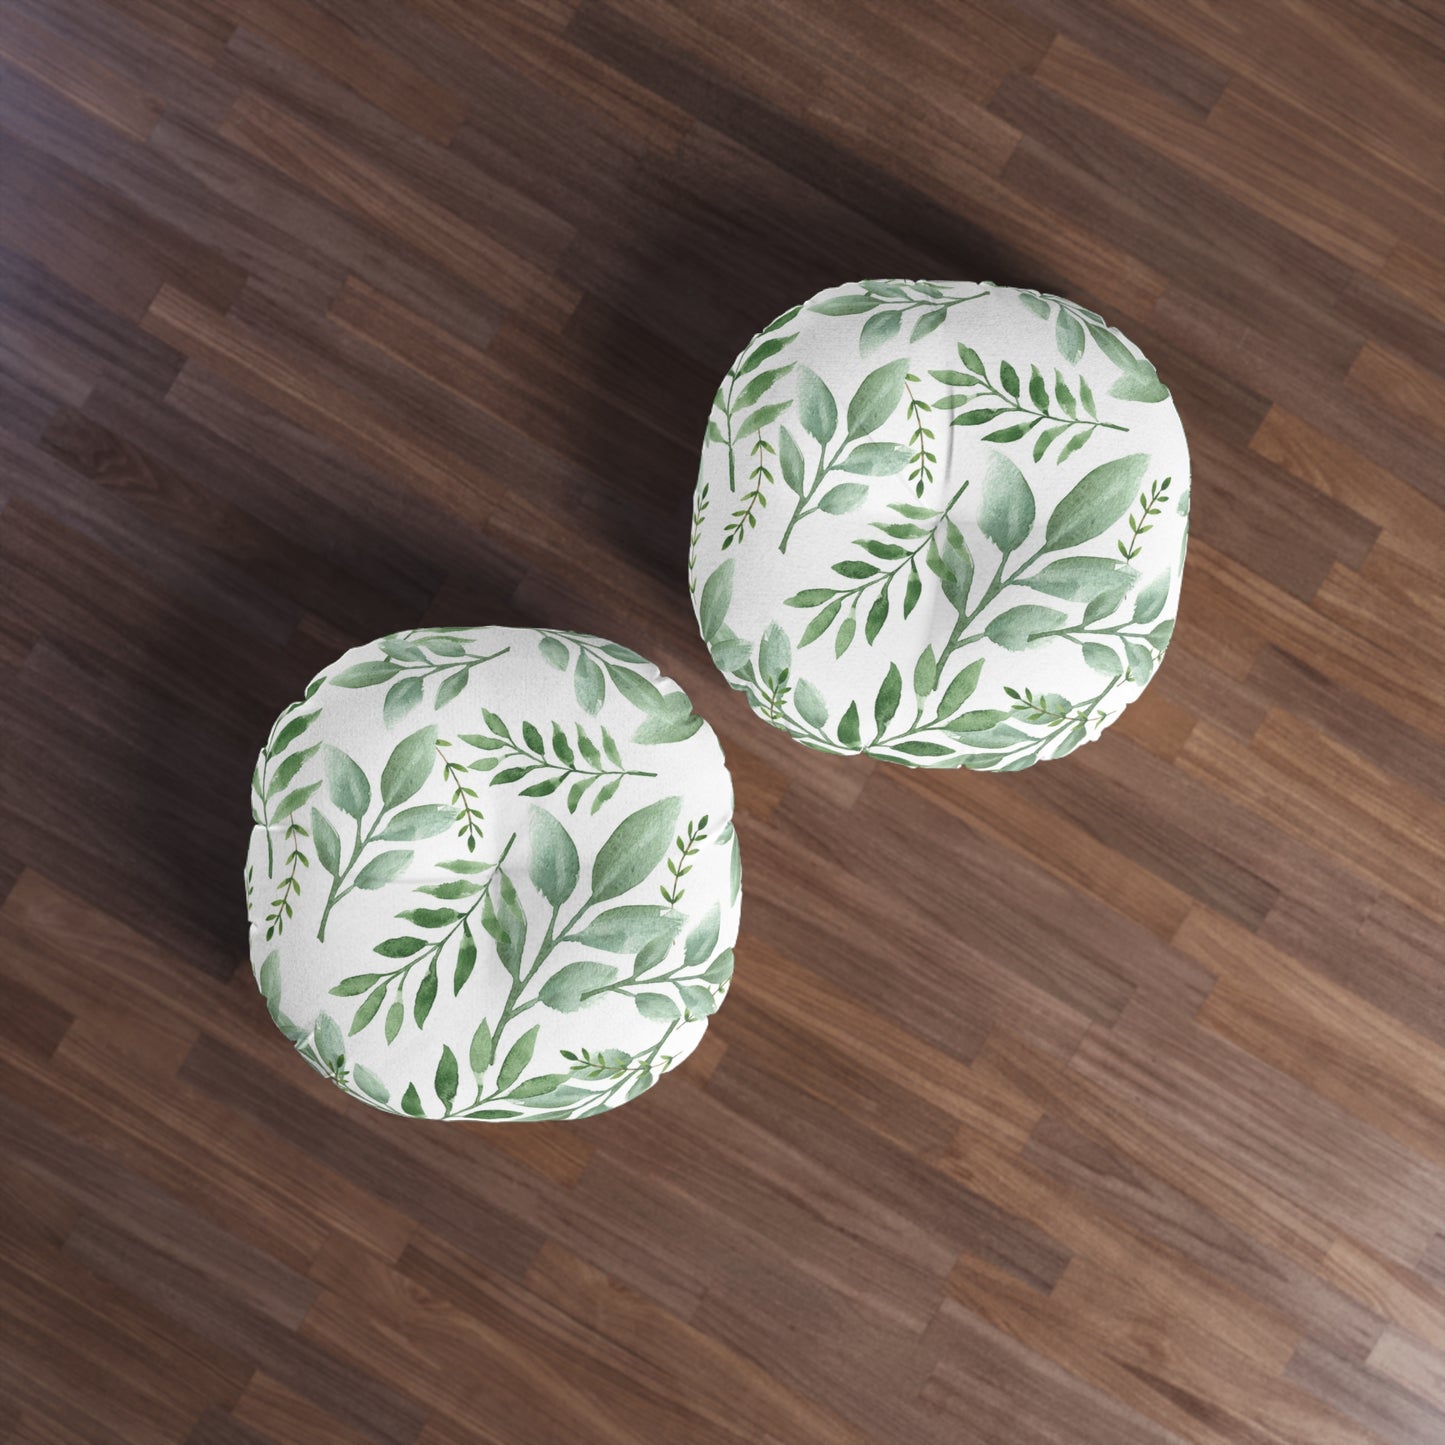 Two Printify round tufted floor-pillows with a green botanical design on a wooden floor.